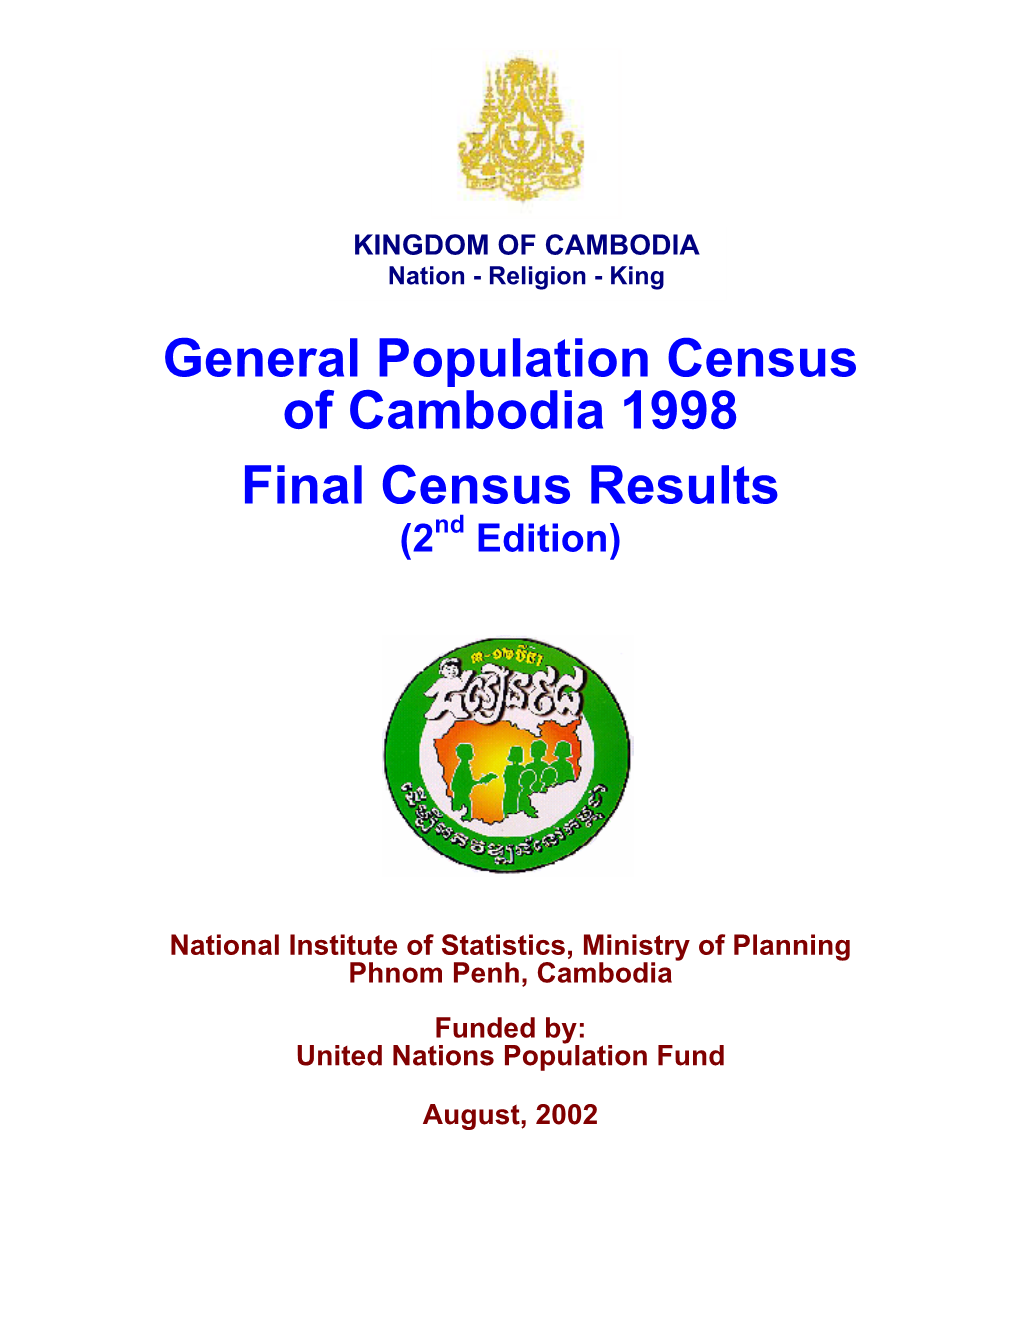 General Population Census of Cambodia 1998 Final Census Results